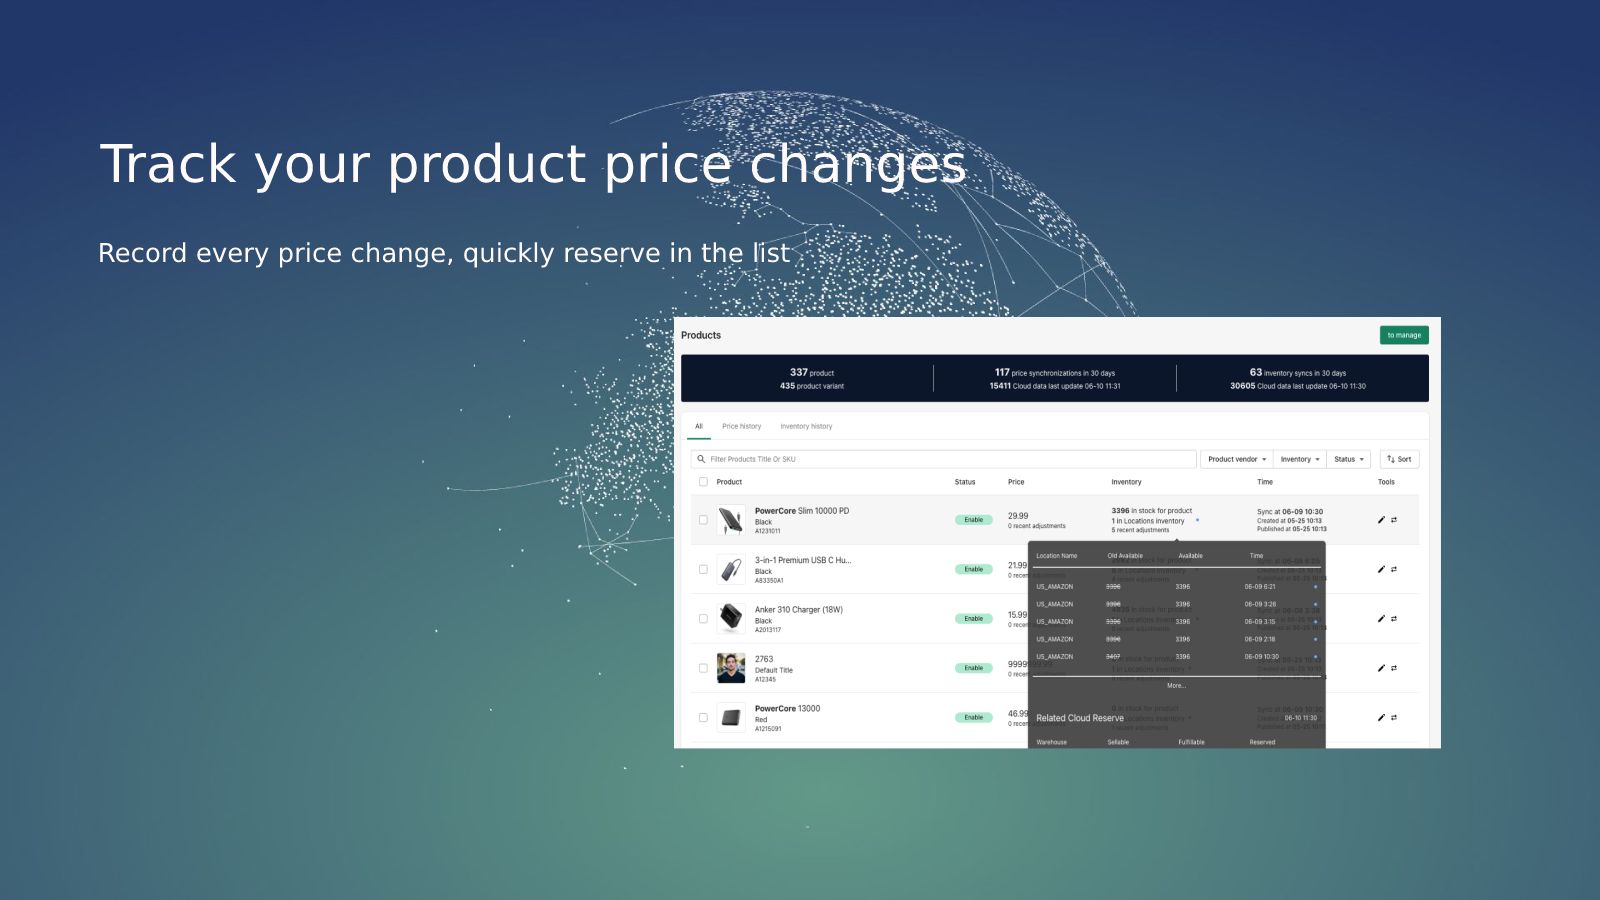 Track your product price changes